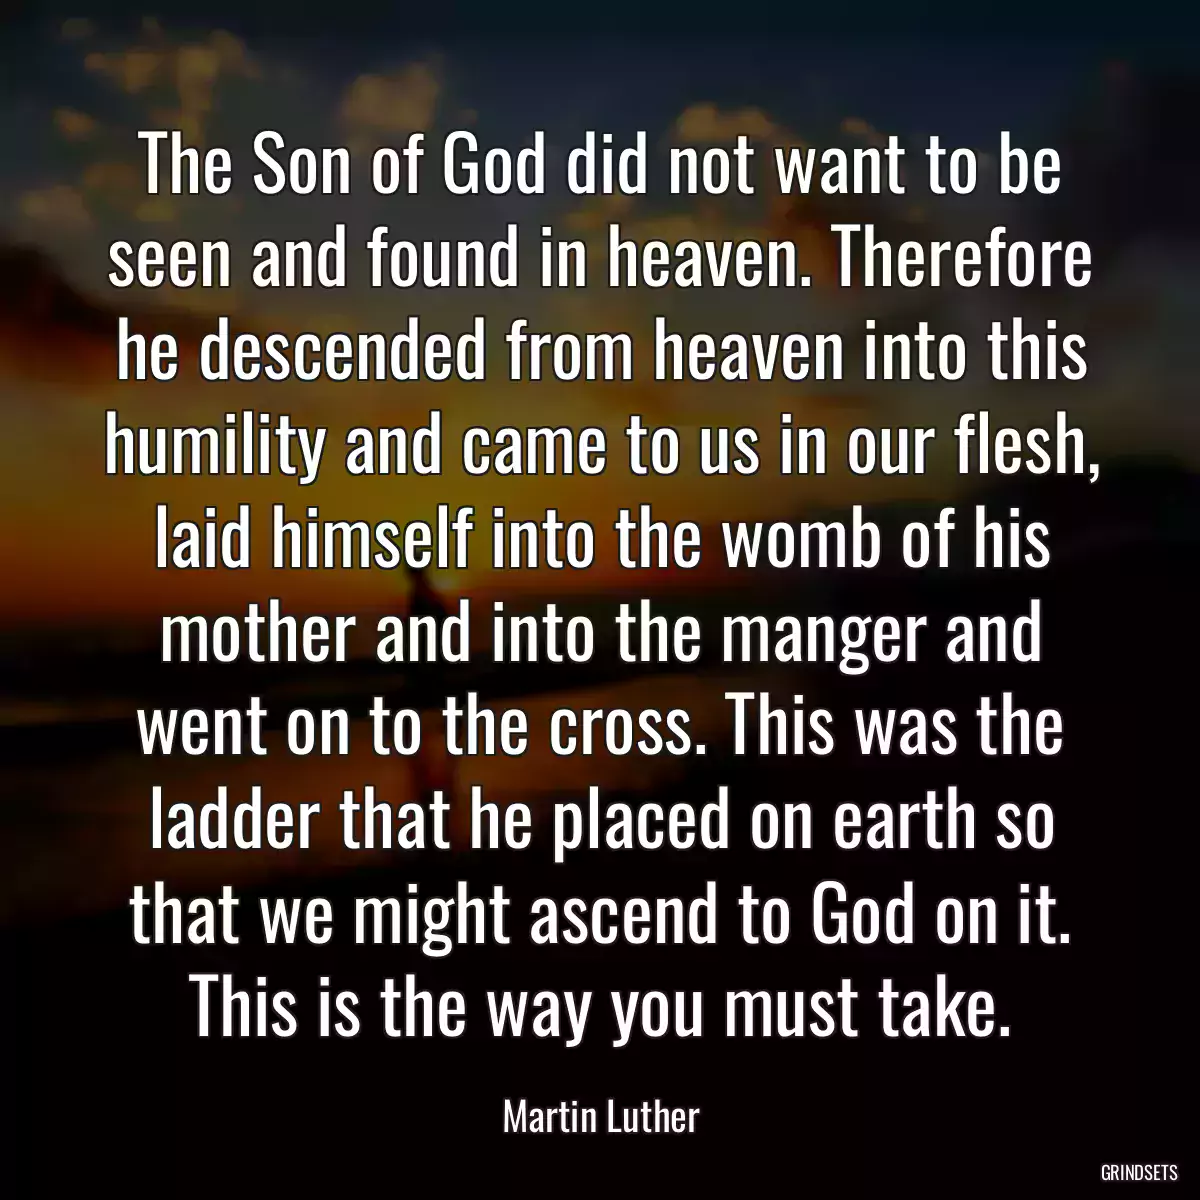 The Son of God did not want to be seen and found in heaven. Therefore he descended from heaven into this humility and came to us in our flesh, laid himself into the womb of his mother and into the manger and went on to the cross. This was the ladder that he placed on earth so that we might ascend to God on it. This is the way you must take.